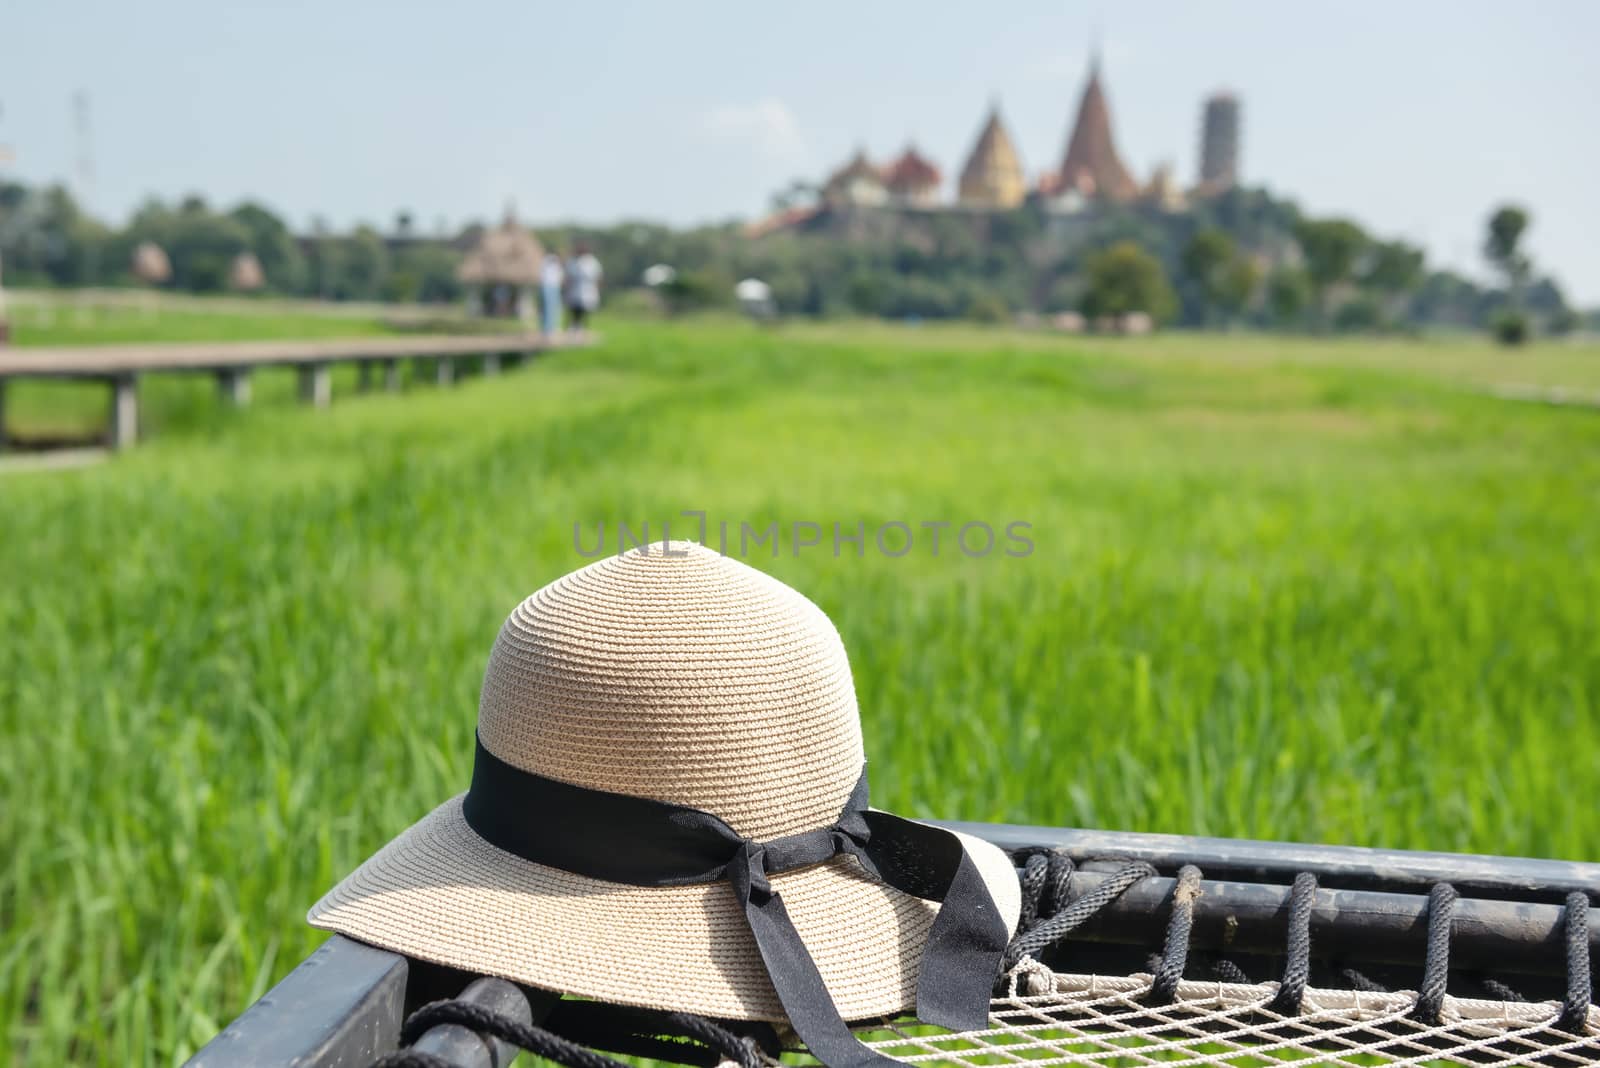 Woman Straw Hat With Landscape Scenery View at Coffee Shop. Relaxation Travel Place and Leisure Activity Concept